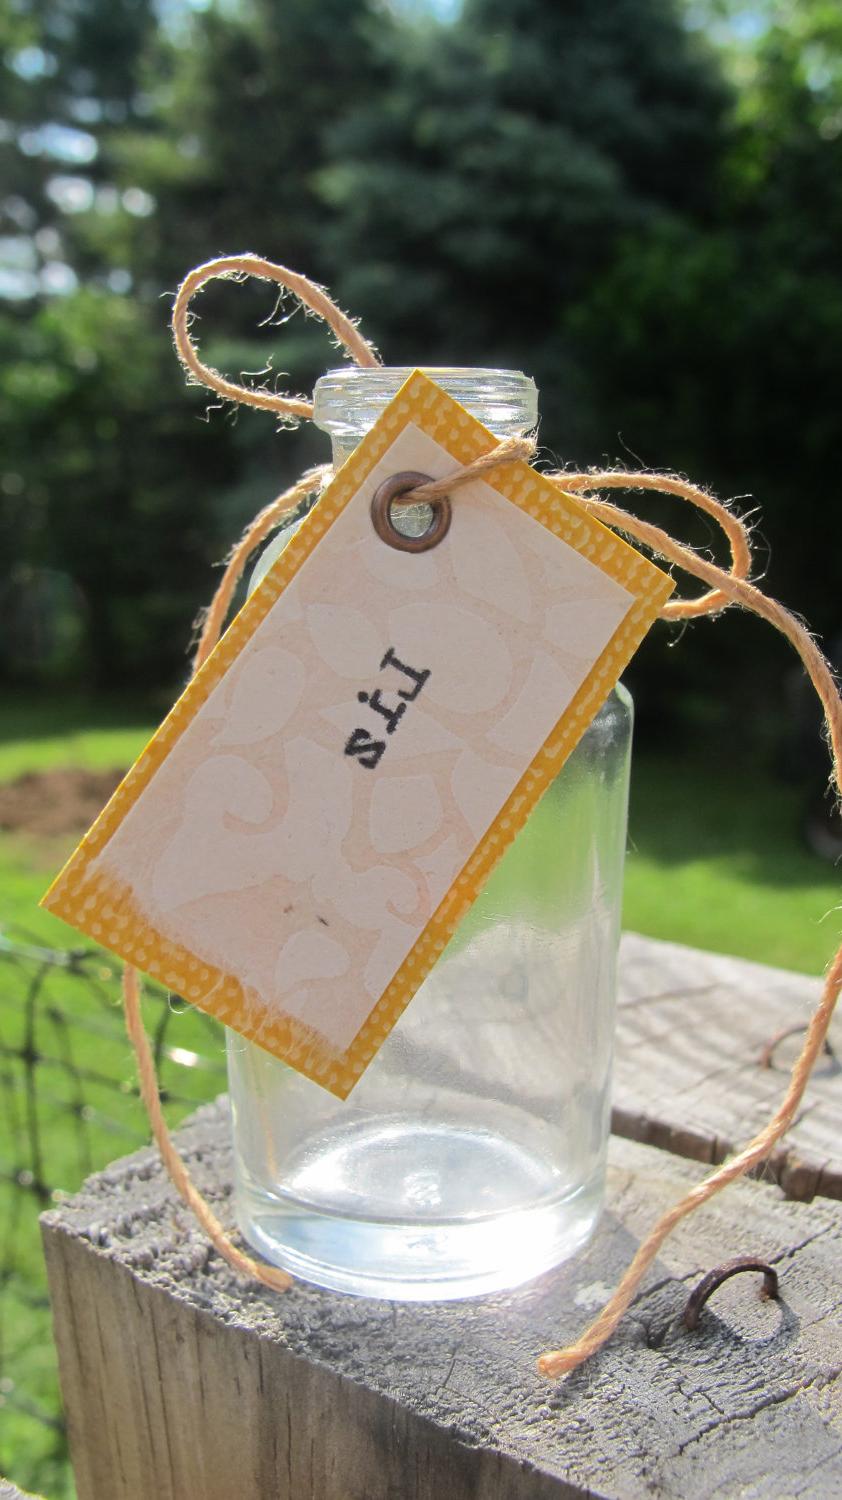 85 Wedding Place Card Favors - Custom Listing for LIZ. From joblake